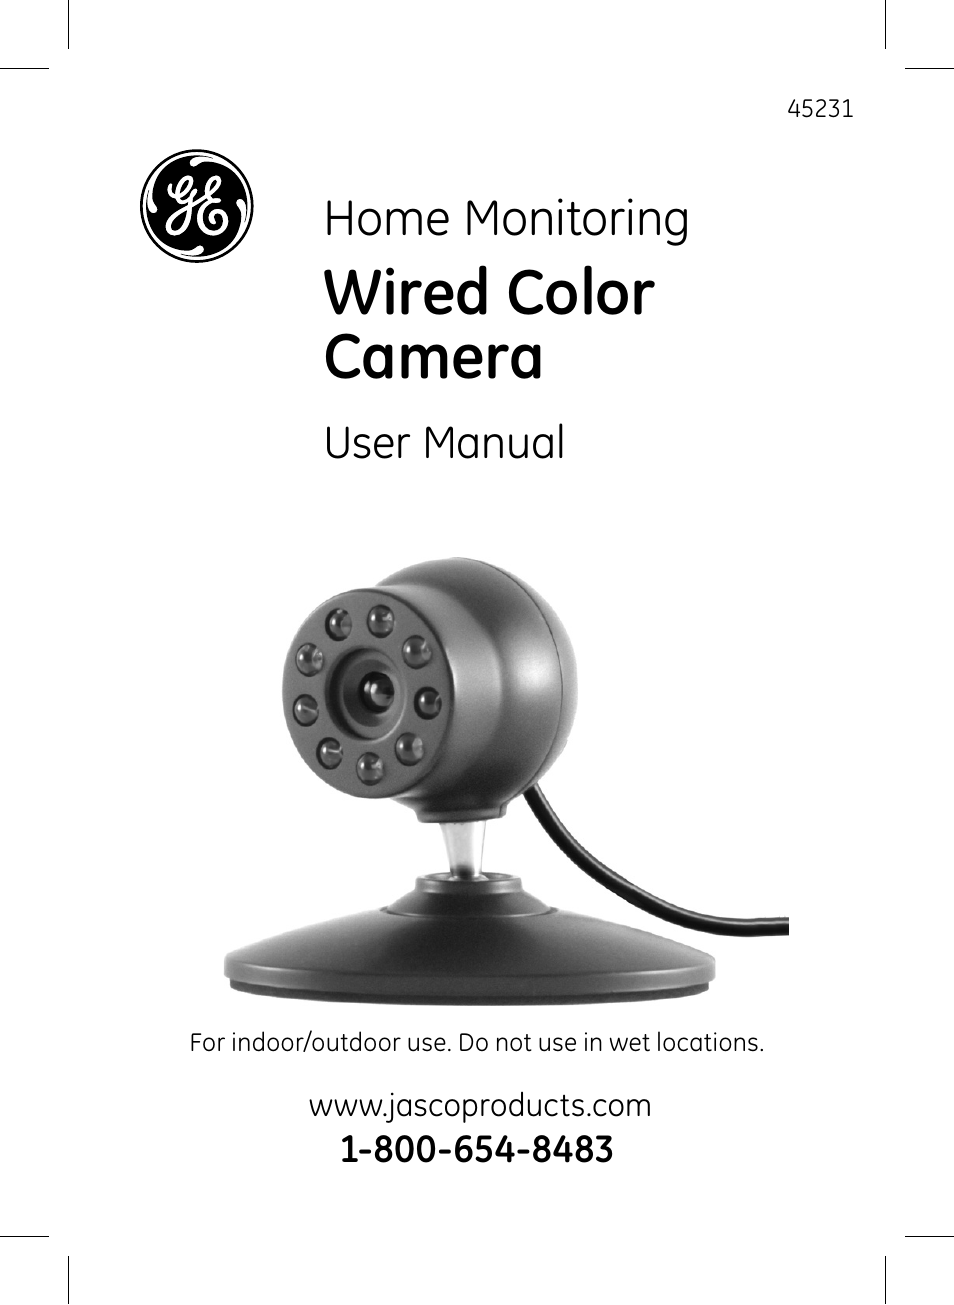 GE 45231 GE Home Monitoring Wired Color Camera with Night Vision User Manual | 12 pages